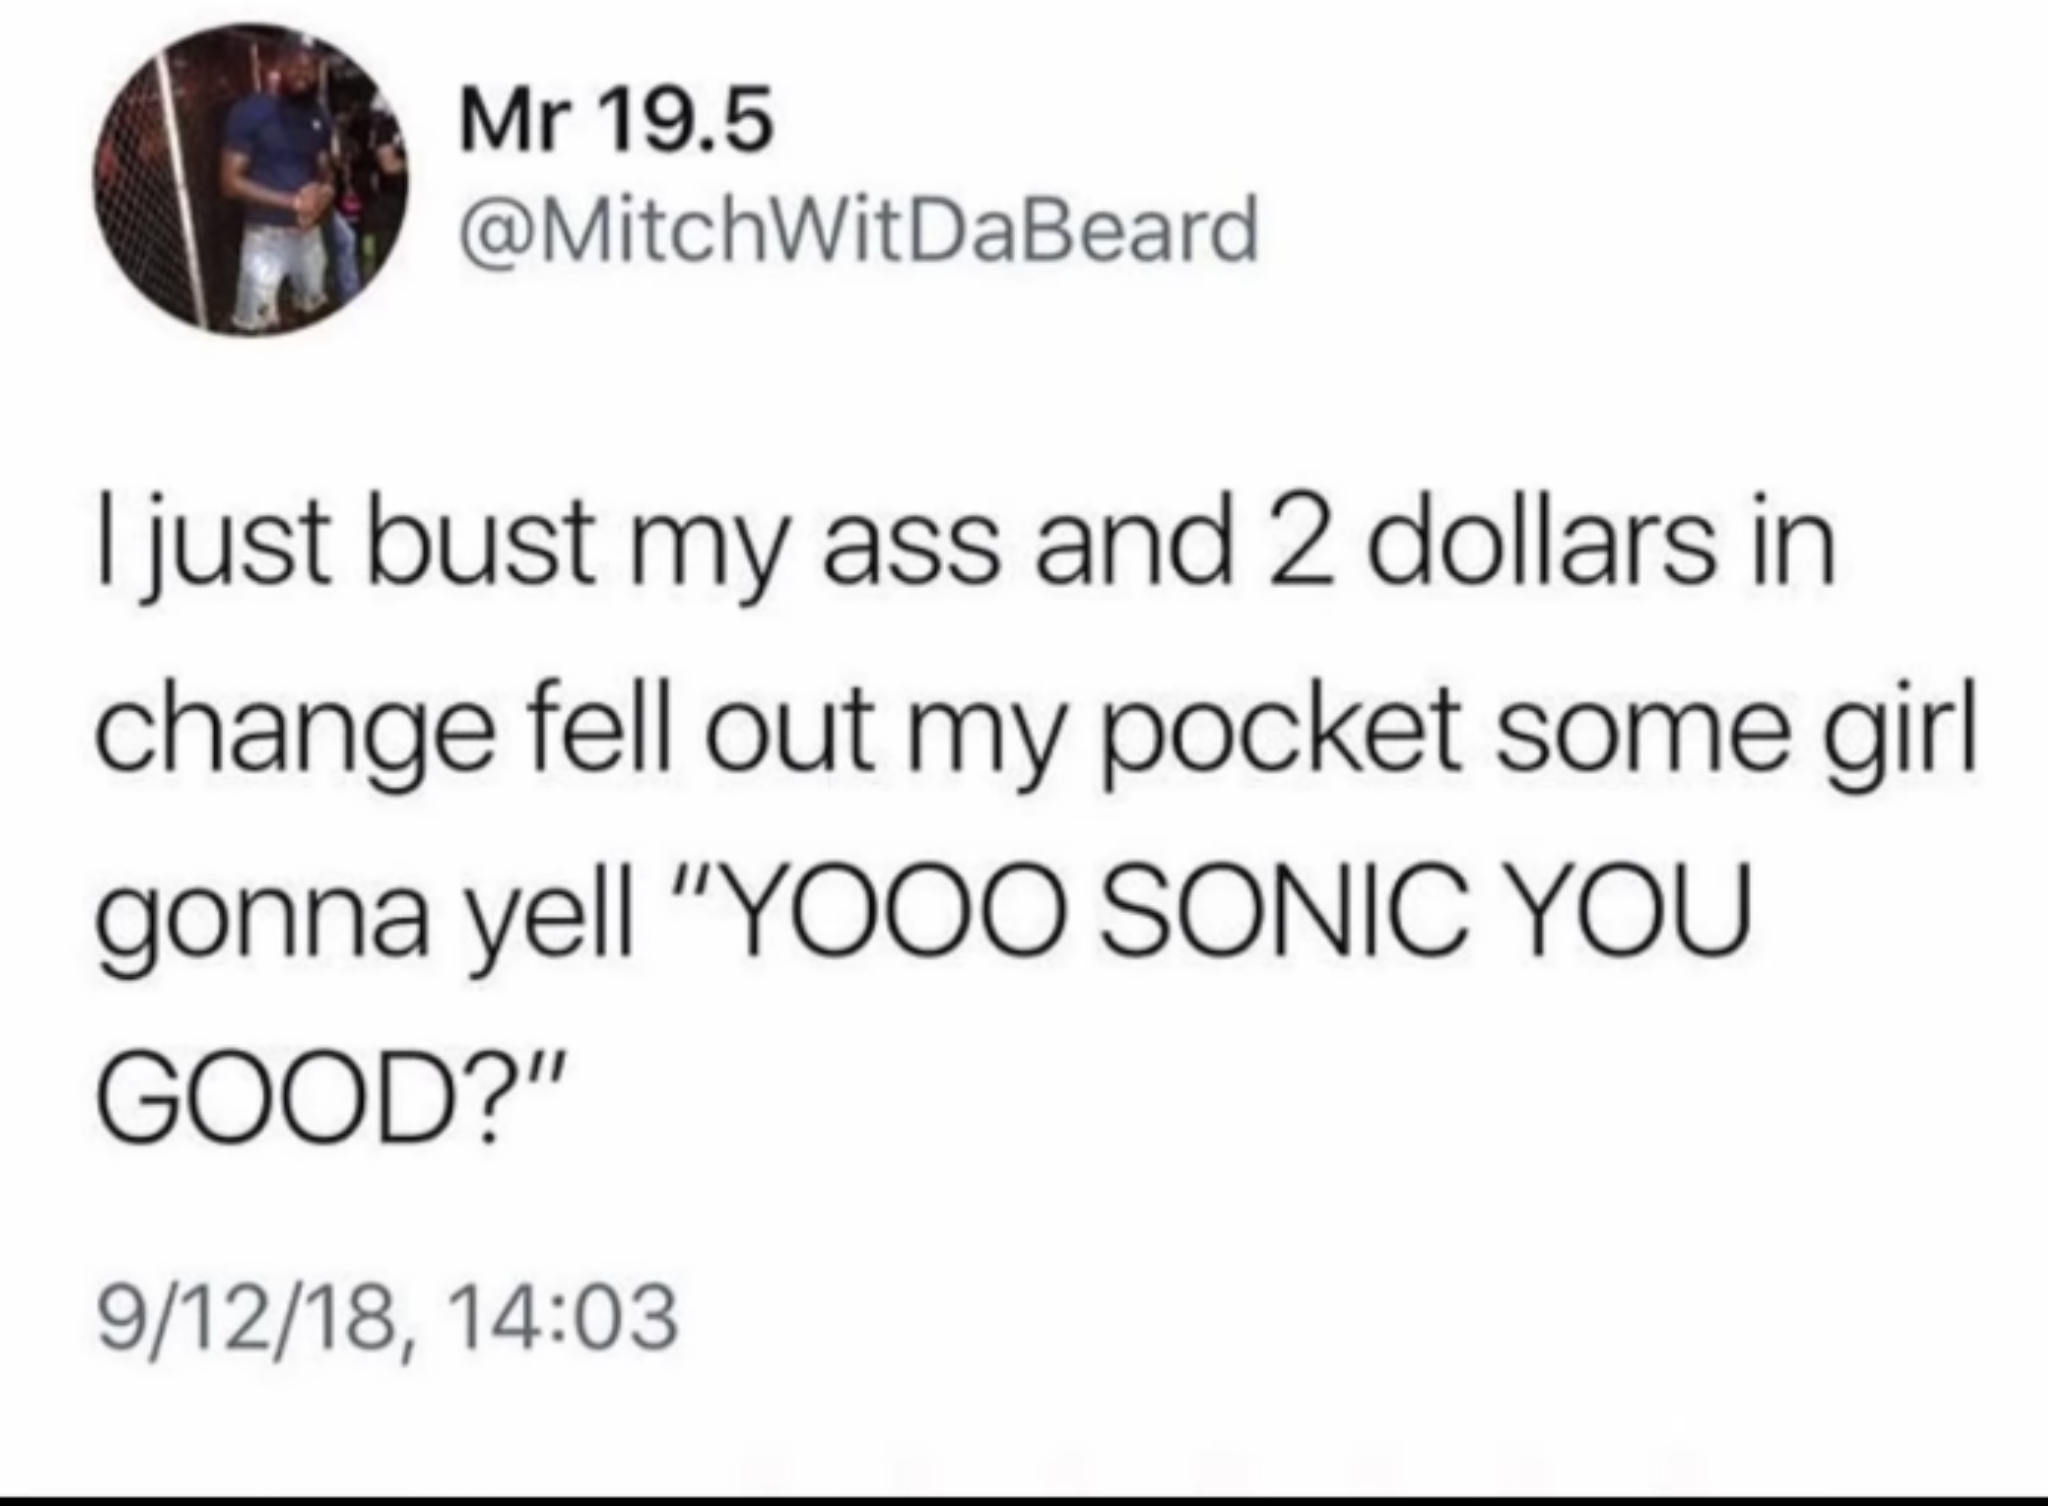 dank memes - dank funny quotes - Mr 19.5 I just bust my ass and 2 dollars in change fell out my pocket some girl gonna yell "Yooo Sonic You Good?" 91218,